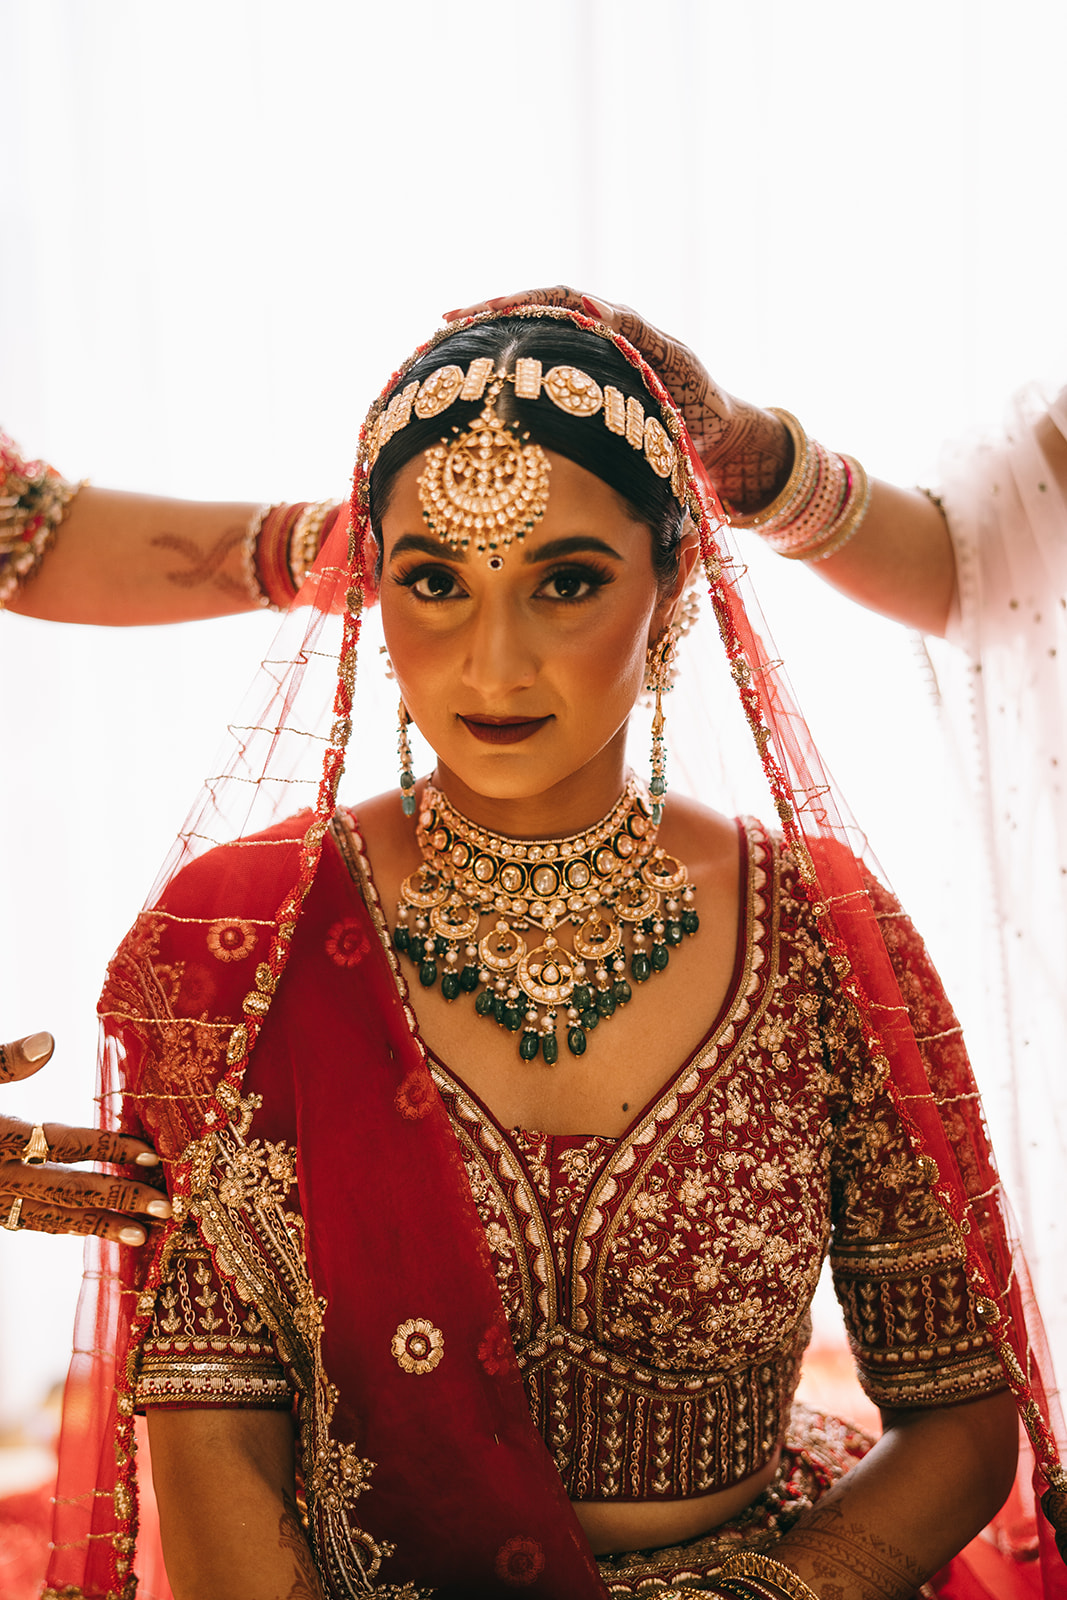 Bride in gold and red dress and golden jewelry and headress looking into the camera smiling slightly